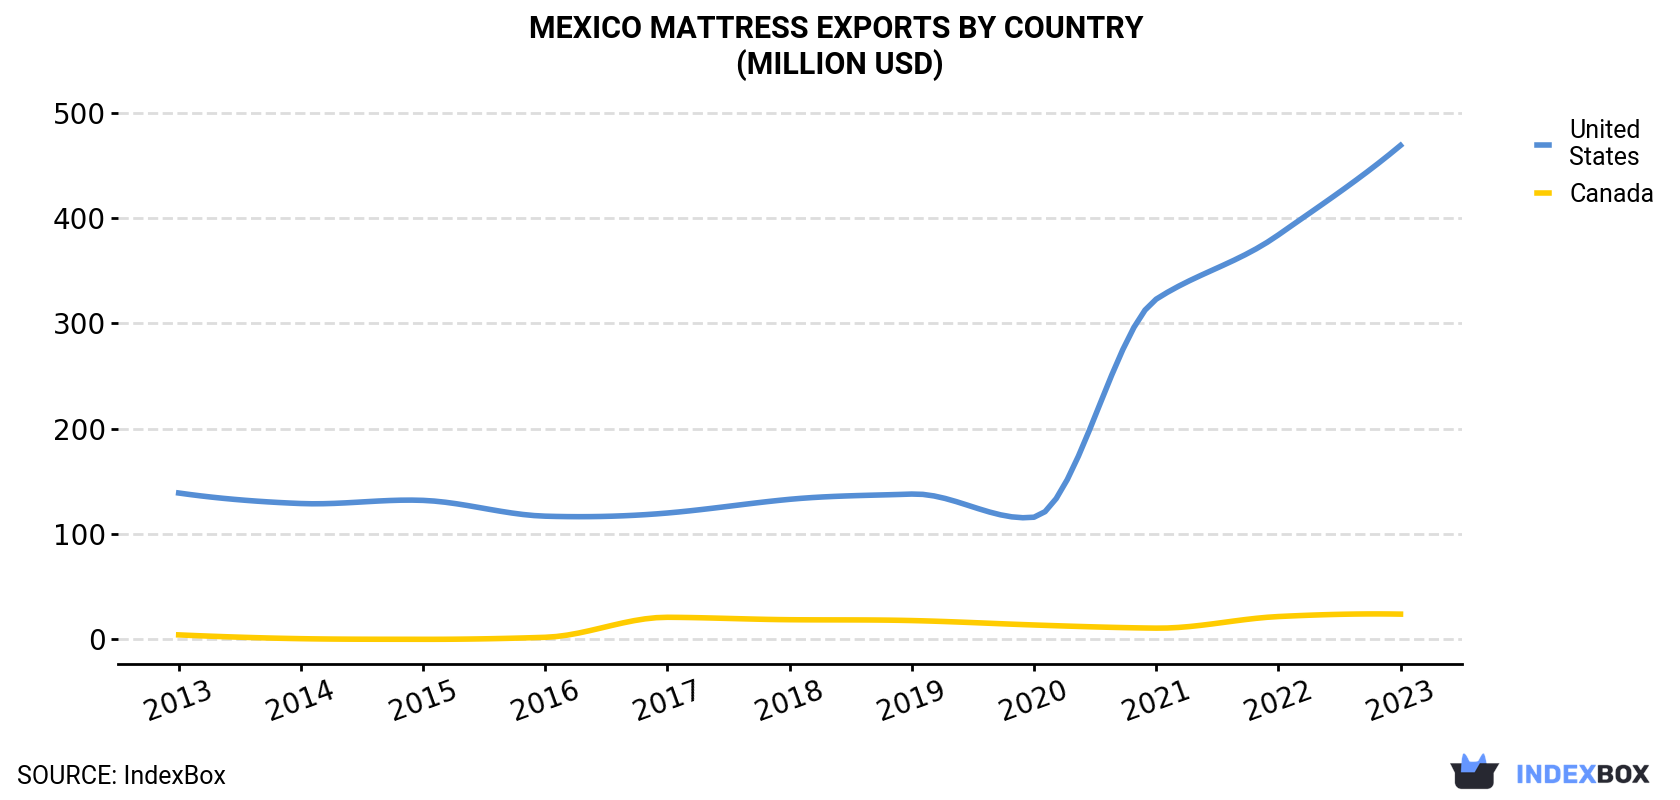 Mexico Mattress Exports By Country (Million USD)